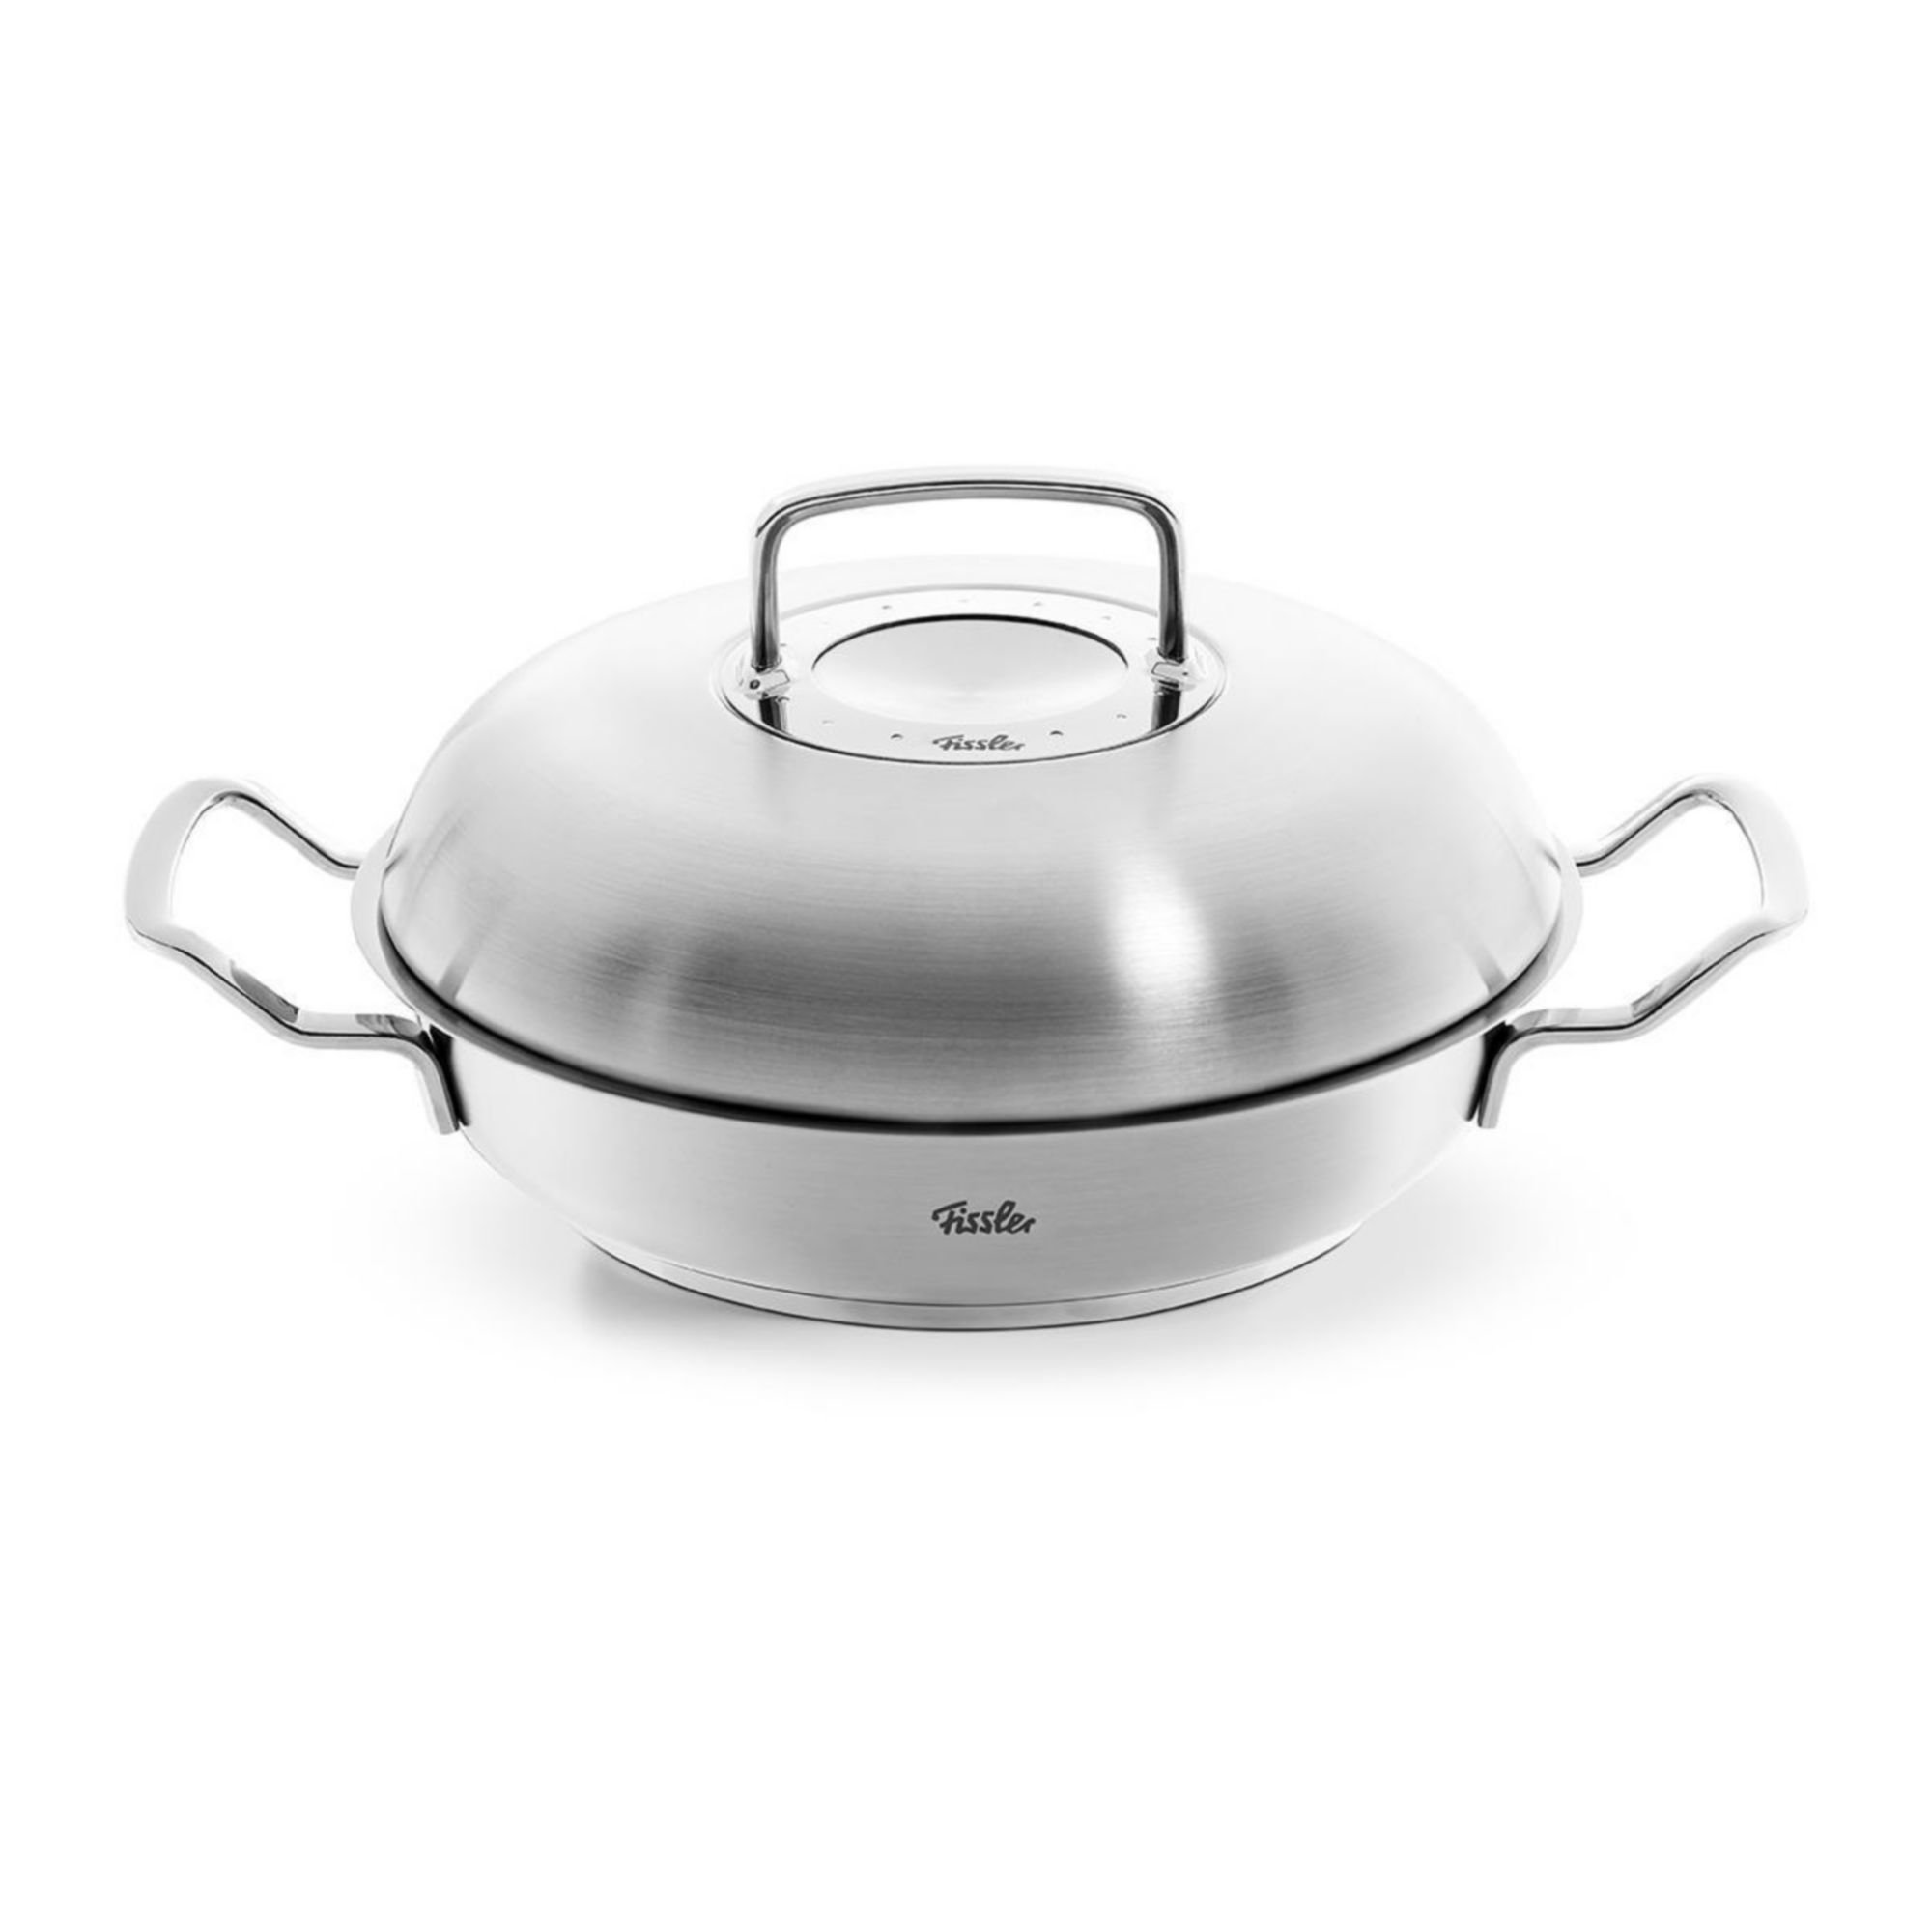 Original-Profi Steel 9.5-Inch Collection® Lid, Wayfair With Pan Stainless Dome Serving Reviews High & | Fissler